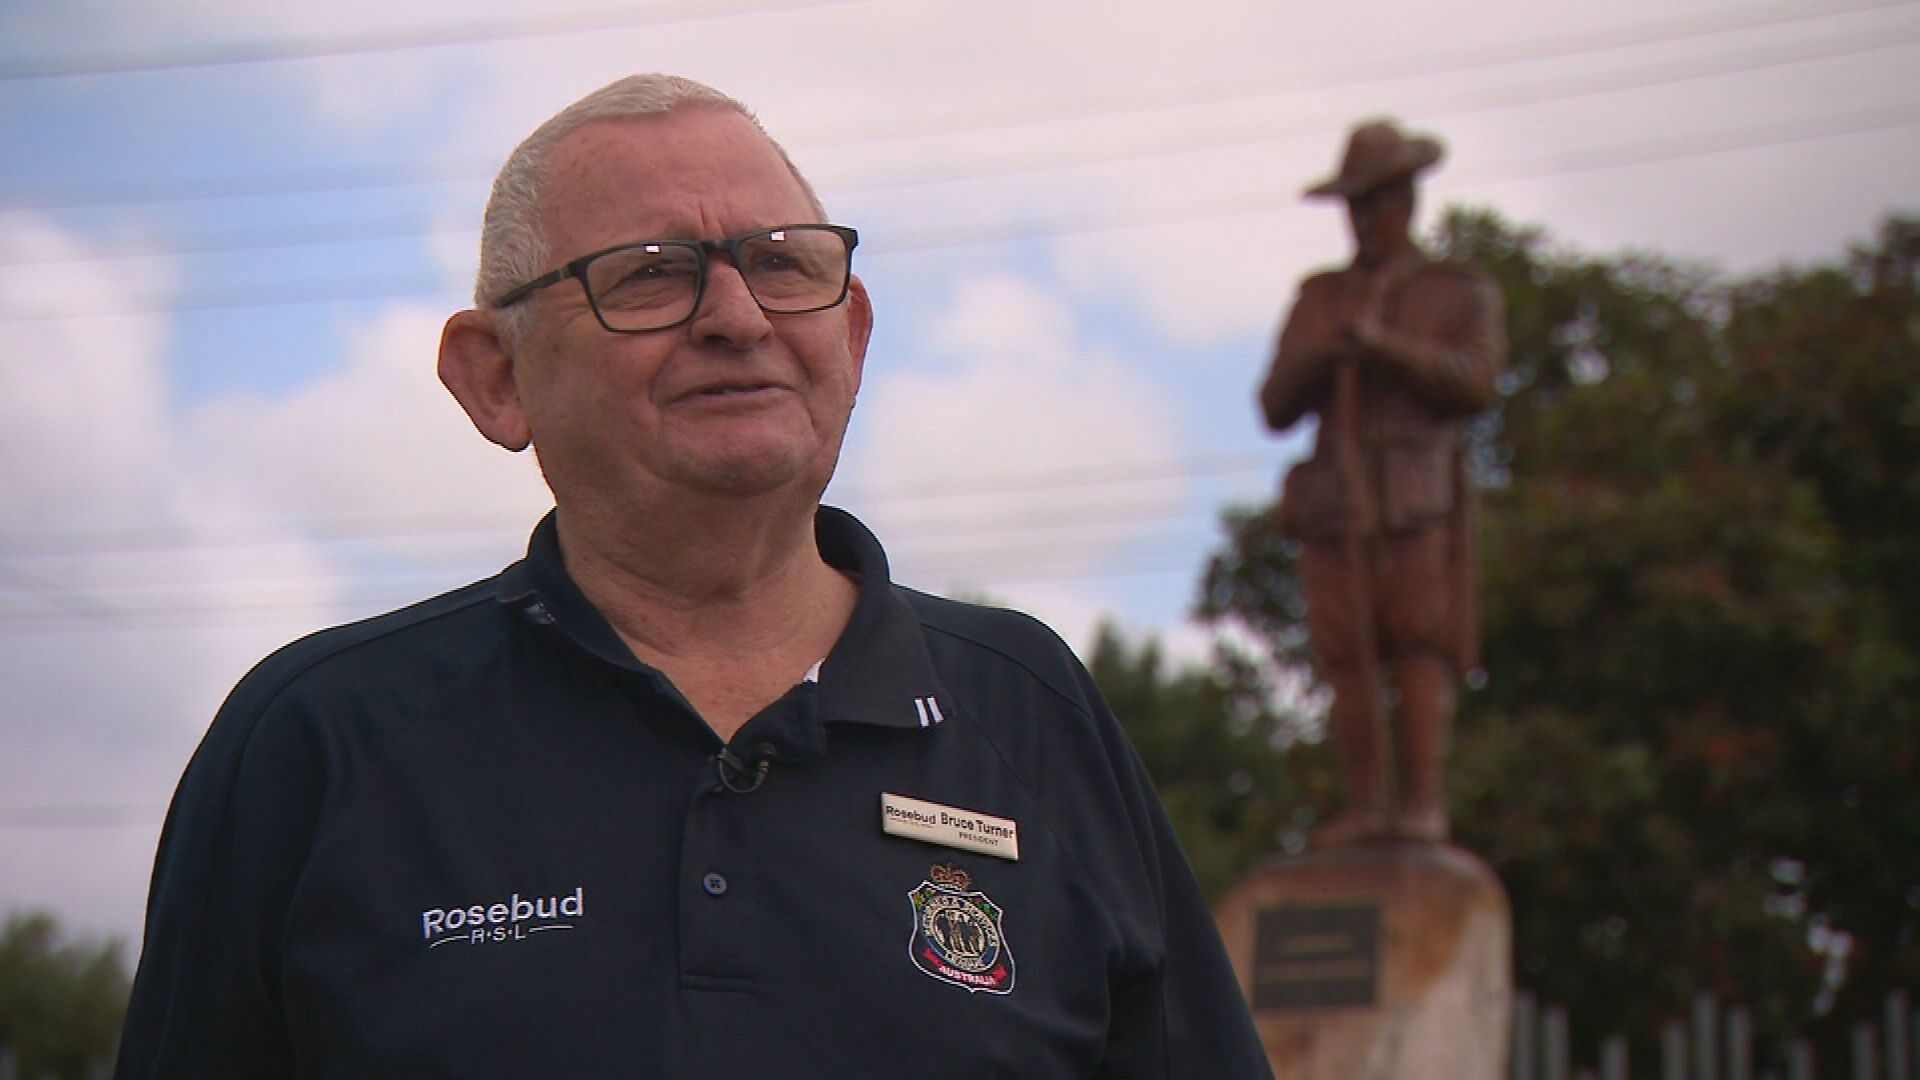 Rosebud RSL president Bruce Turner said he is pleased the statue has now been moved.